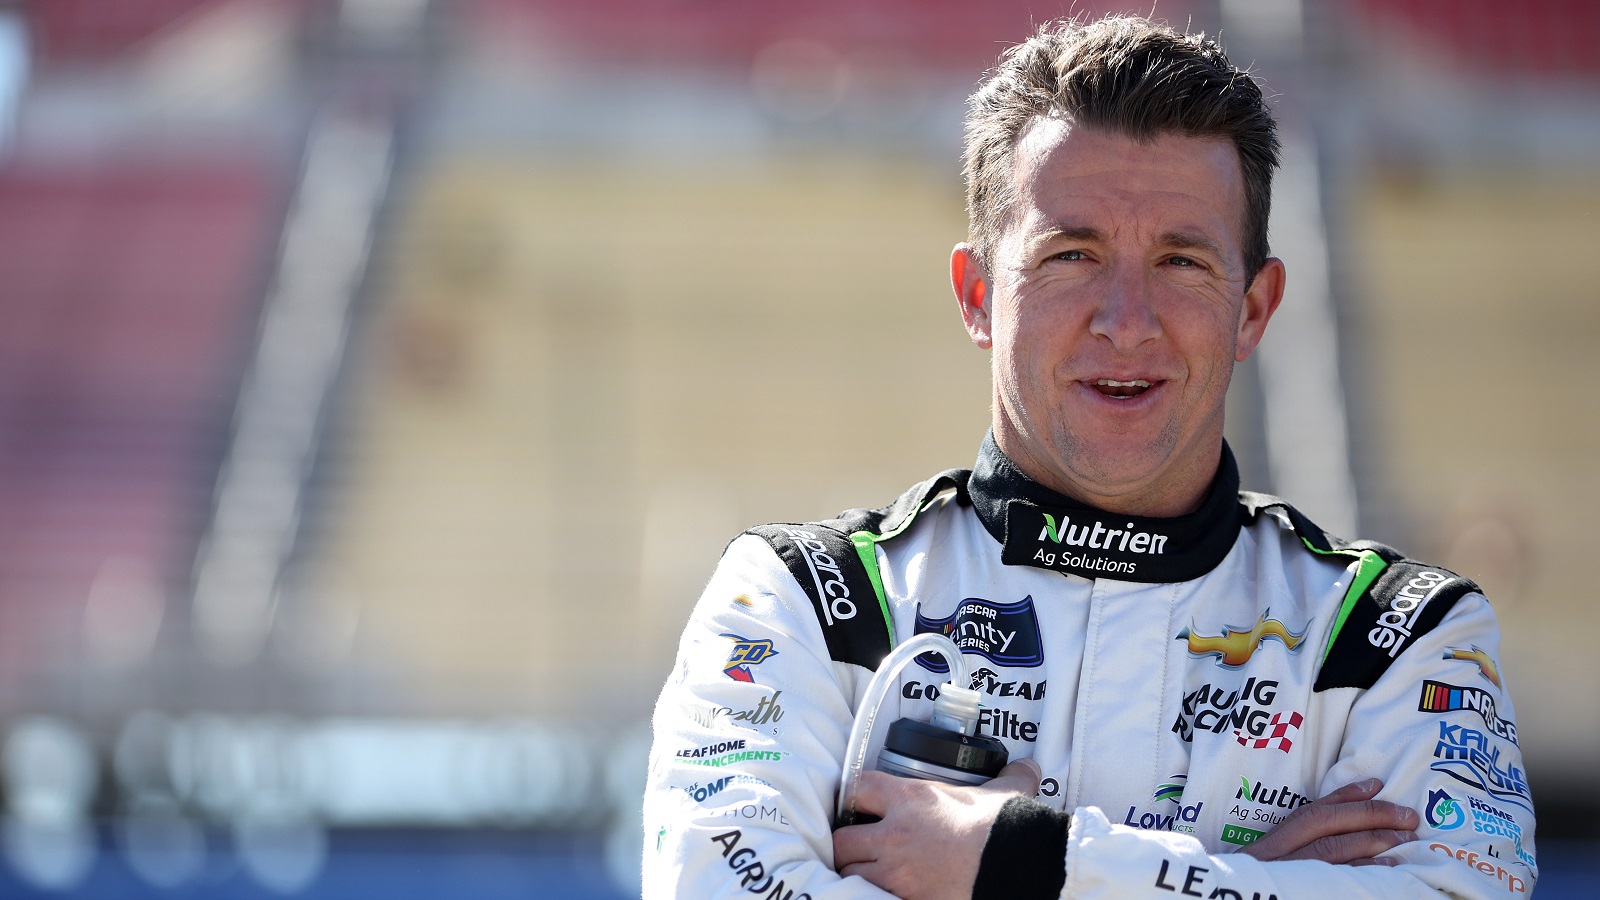 AJ Allmendinger looks on during qualifying for the NASCAR Xfinity Series Production Alliance 300 at Auto Club Speedway on Feb. 26, 2022, in Fontana, California. | James Gilbert/Getty Images